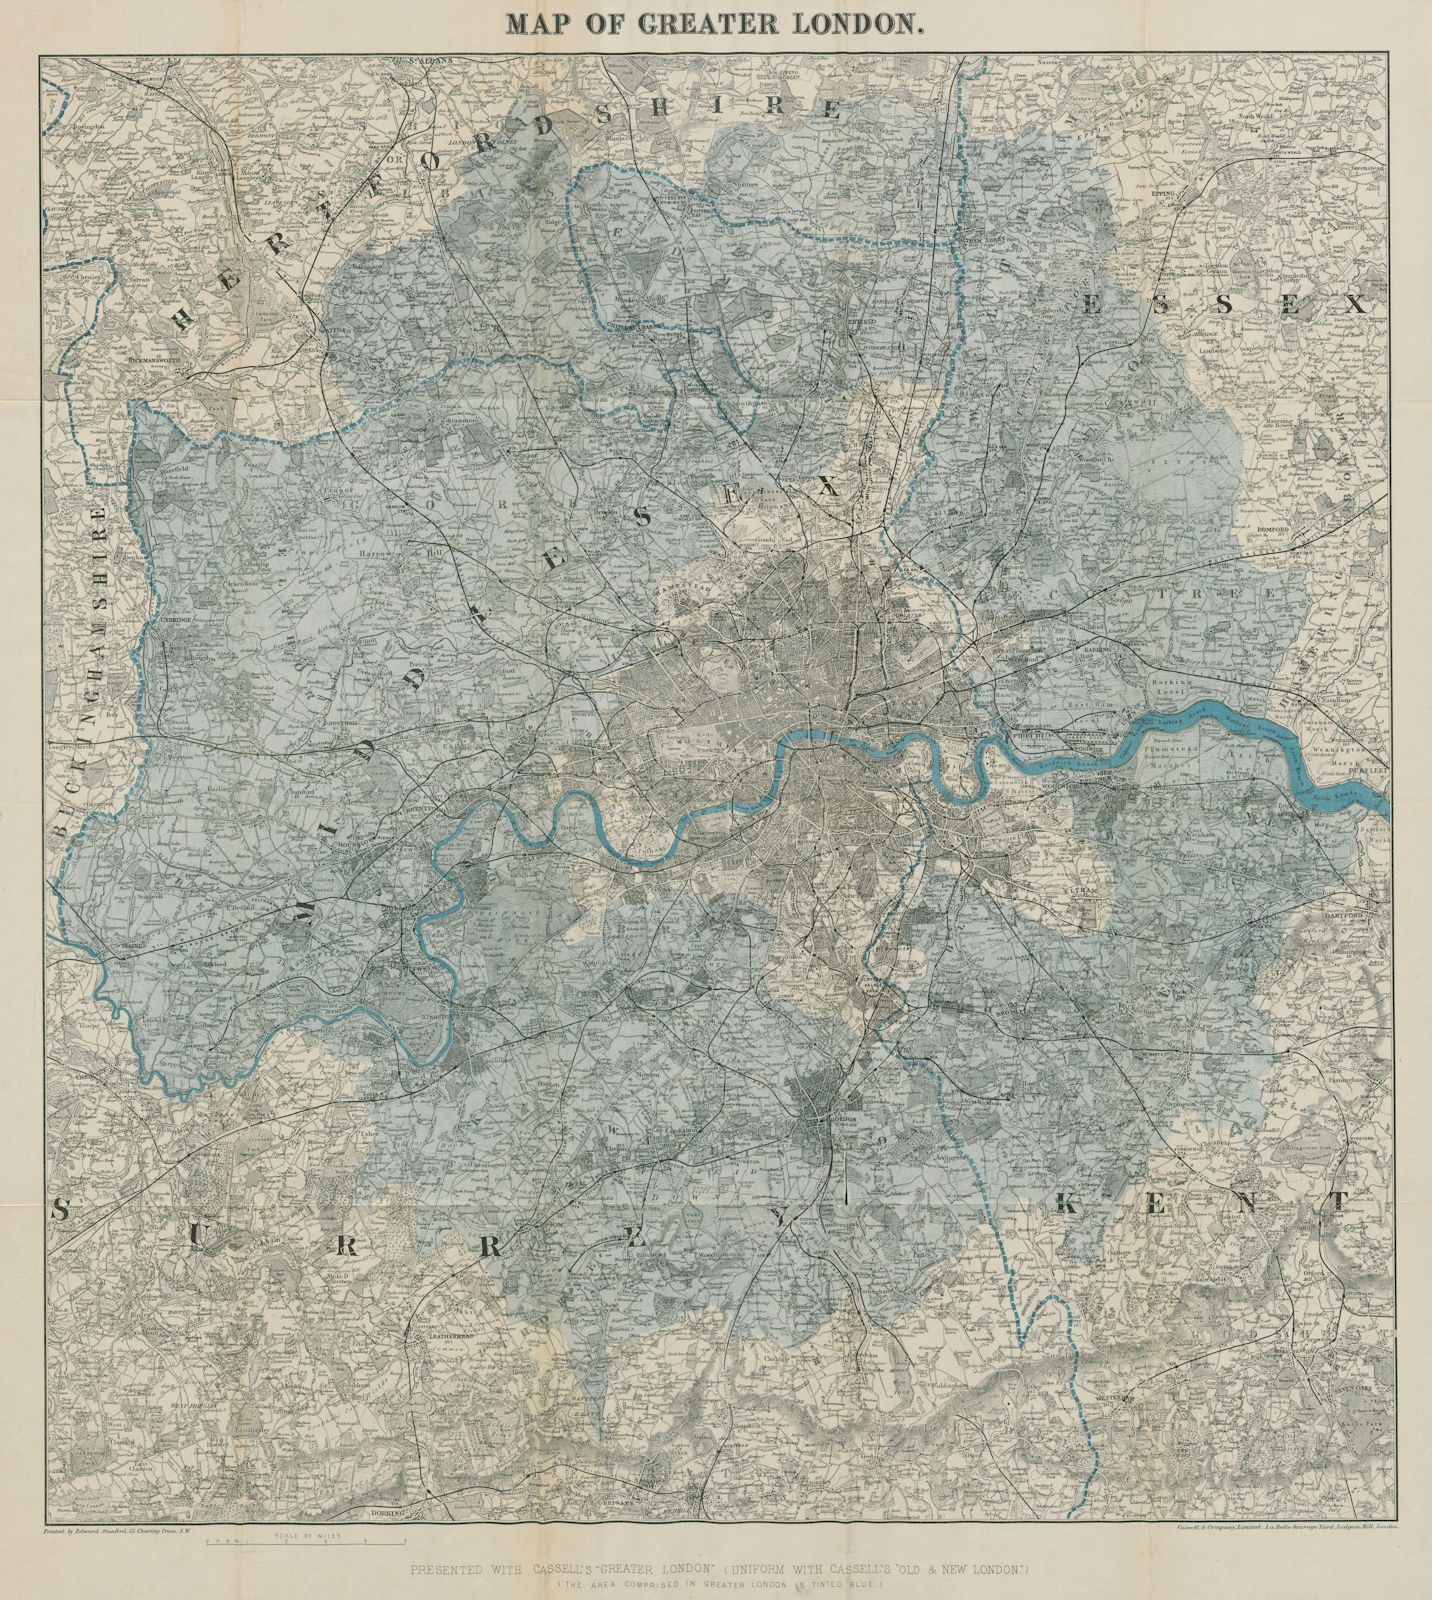 Large folding map of GREATER LONDON by Edward STANFORD. 75x86cm 1888